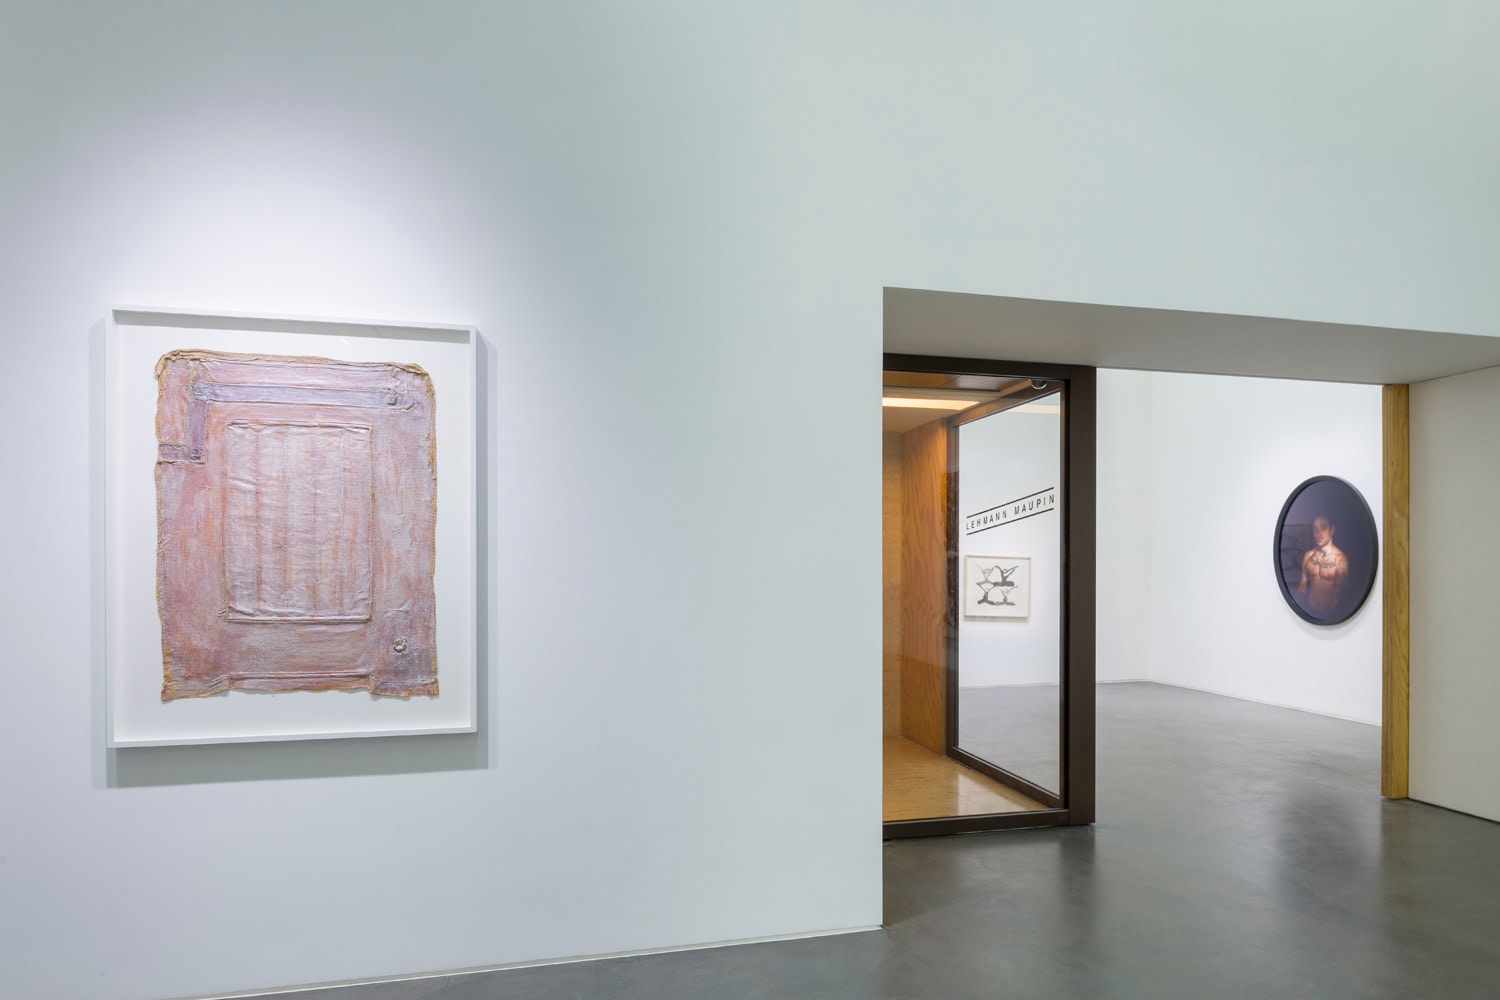 Seventh installation view of the group exhibition be/longing at Lehmann Maupin Hong Kong